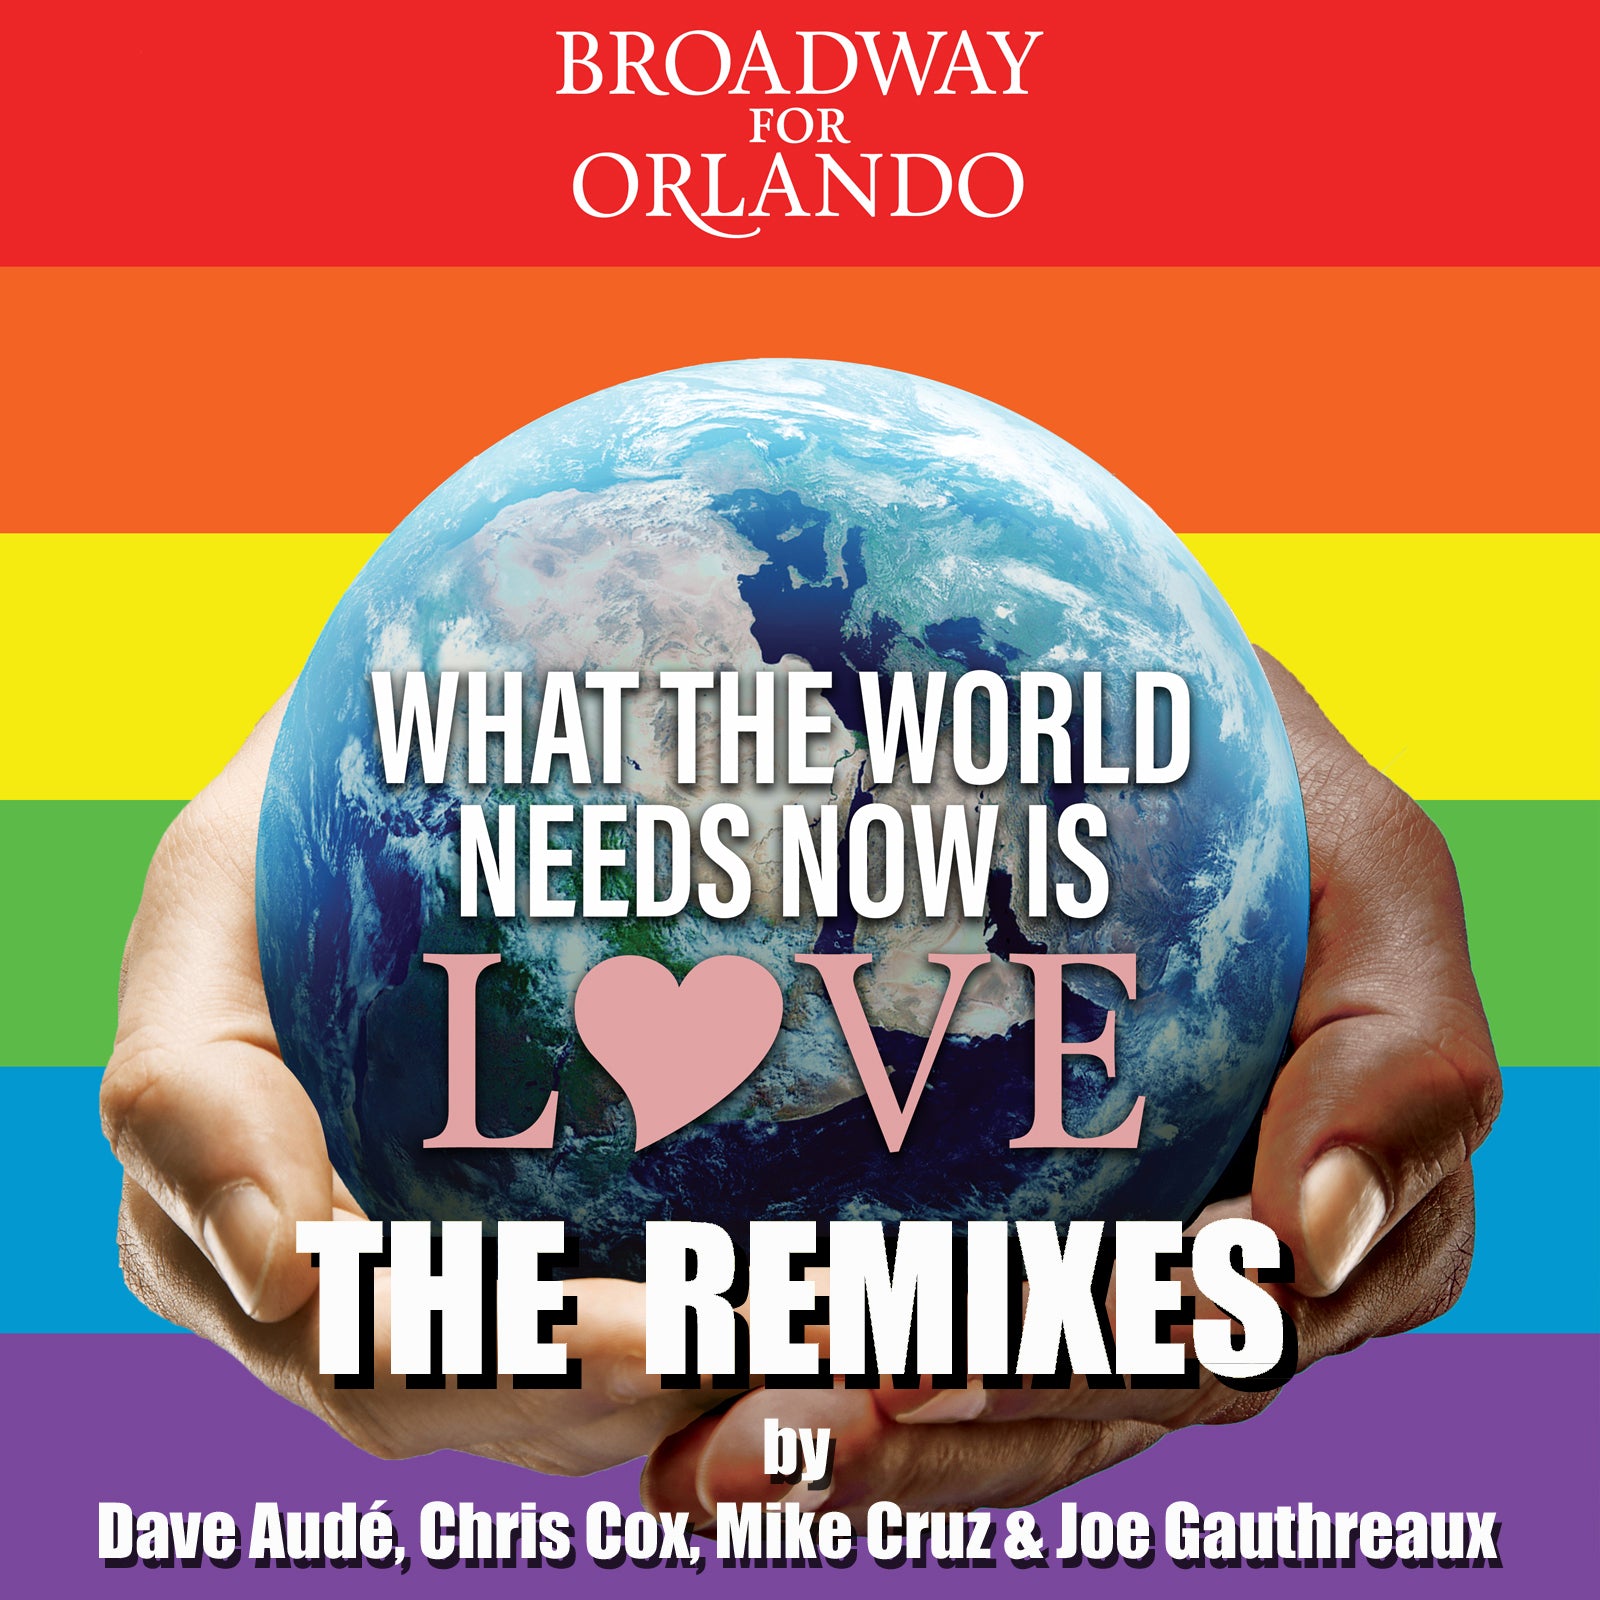 Broadway For Orlando: What the World Needs Now is Love - The Remix EP [CD]